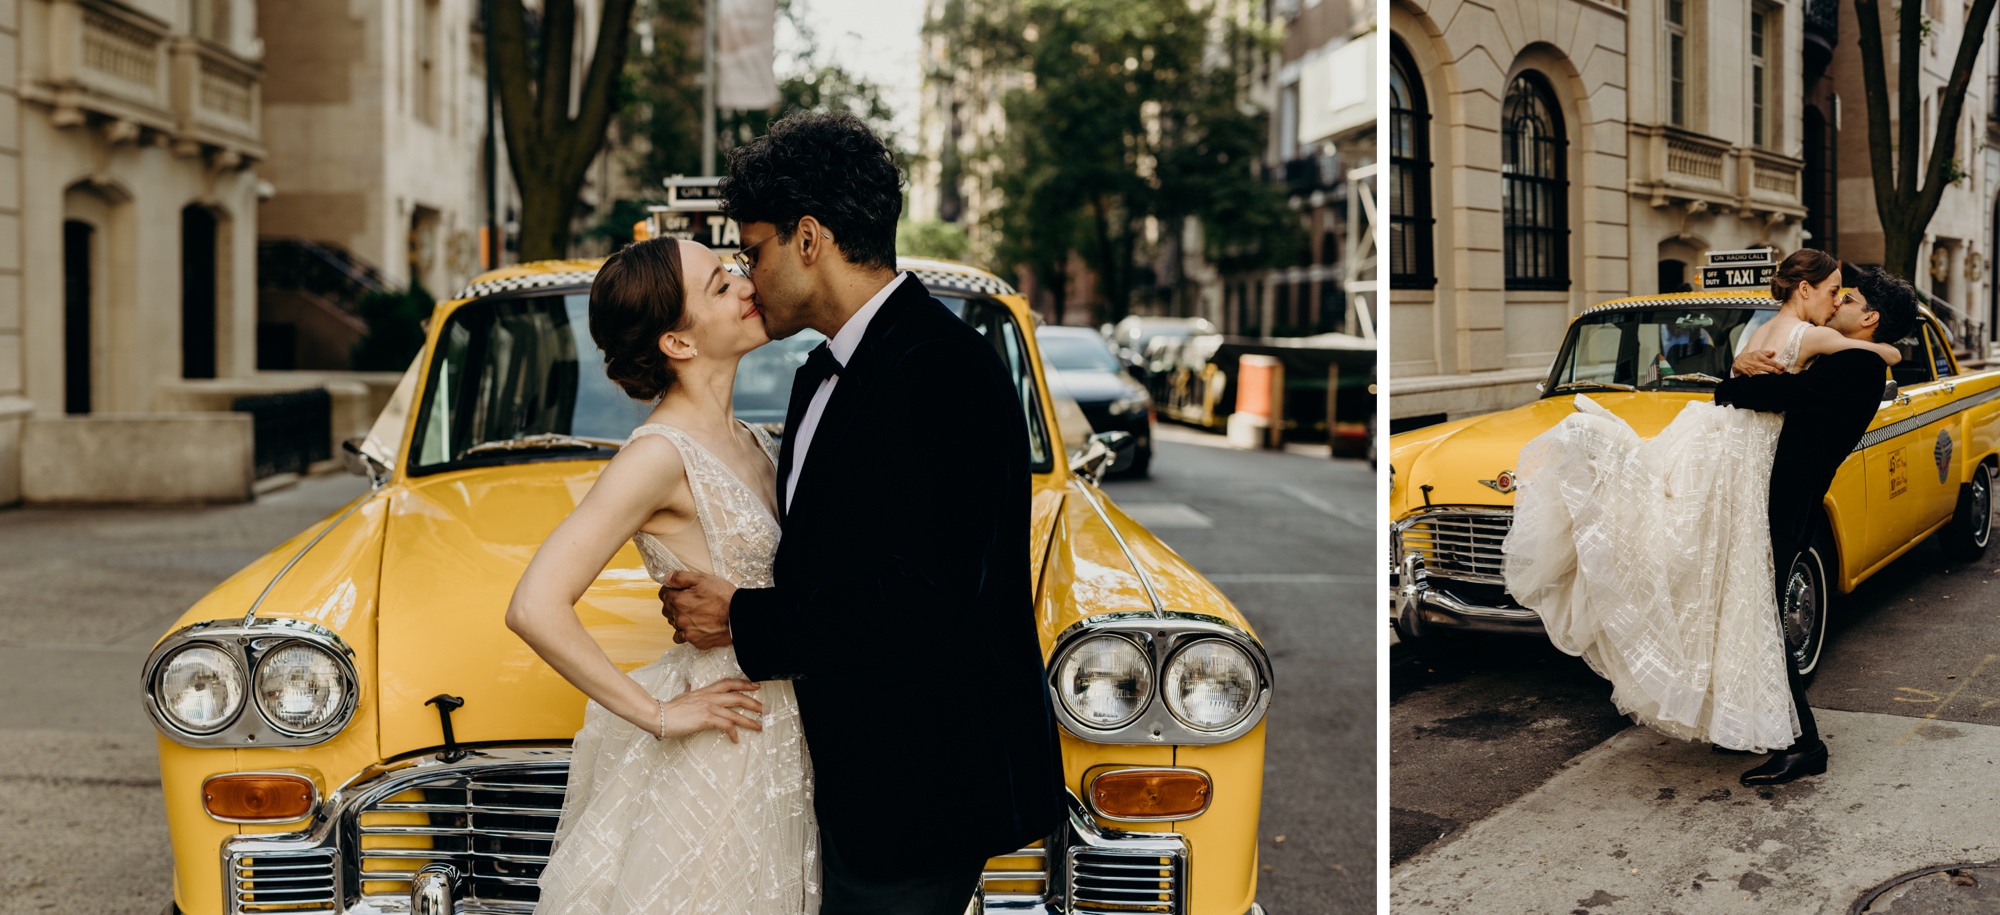 portrait of a bride and groom kissing and hugging in front of a vintage yellow cab in new york city